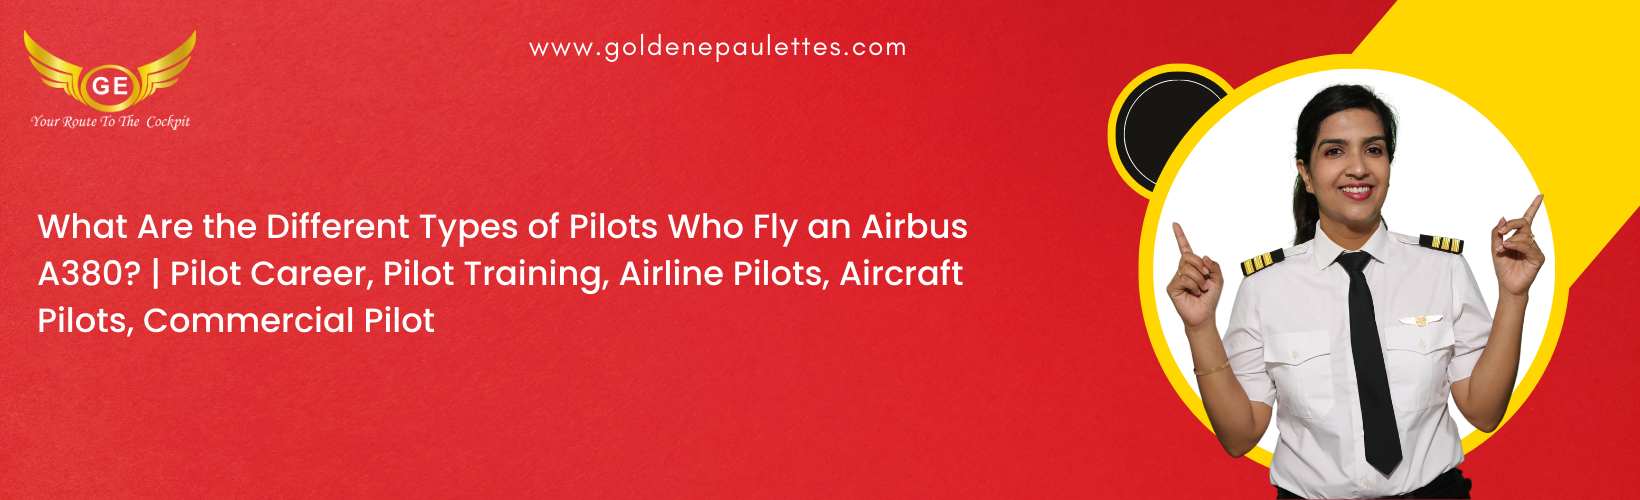 The Different Types of Pilots Who Fly an Airbus A380